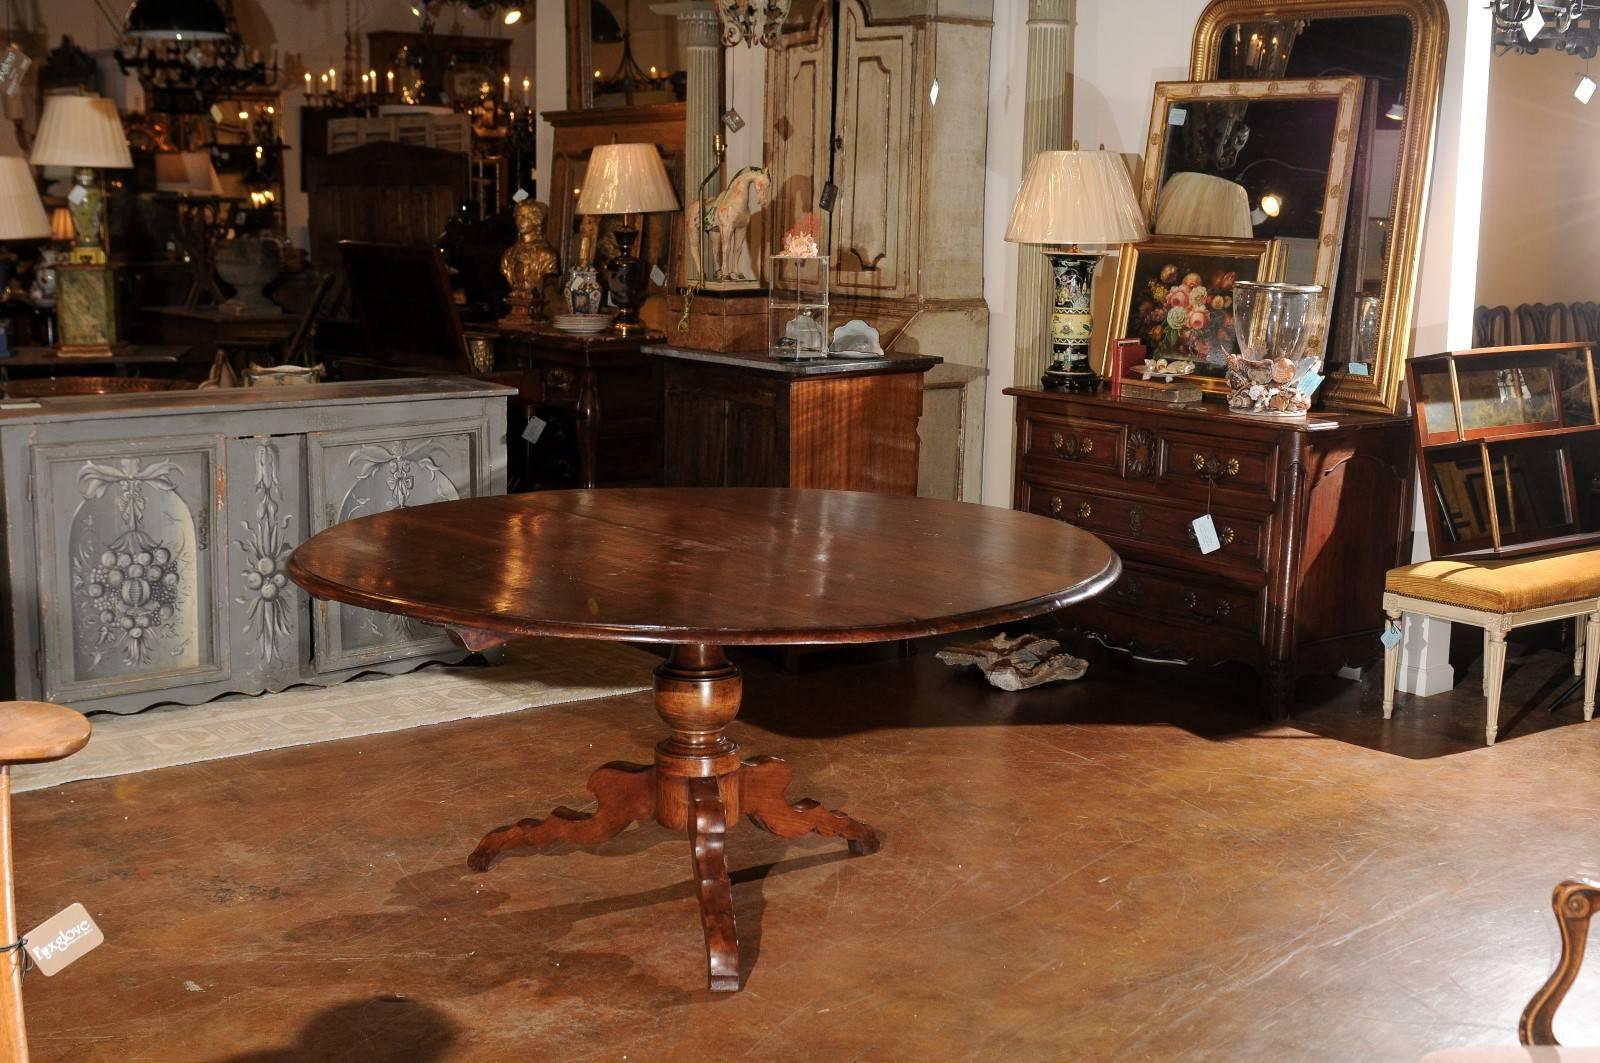 Carved Italian Walnut Dining Table with Round Top and Pedestal Base, circa 1880